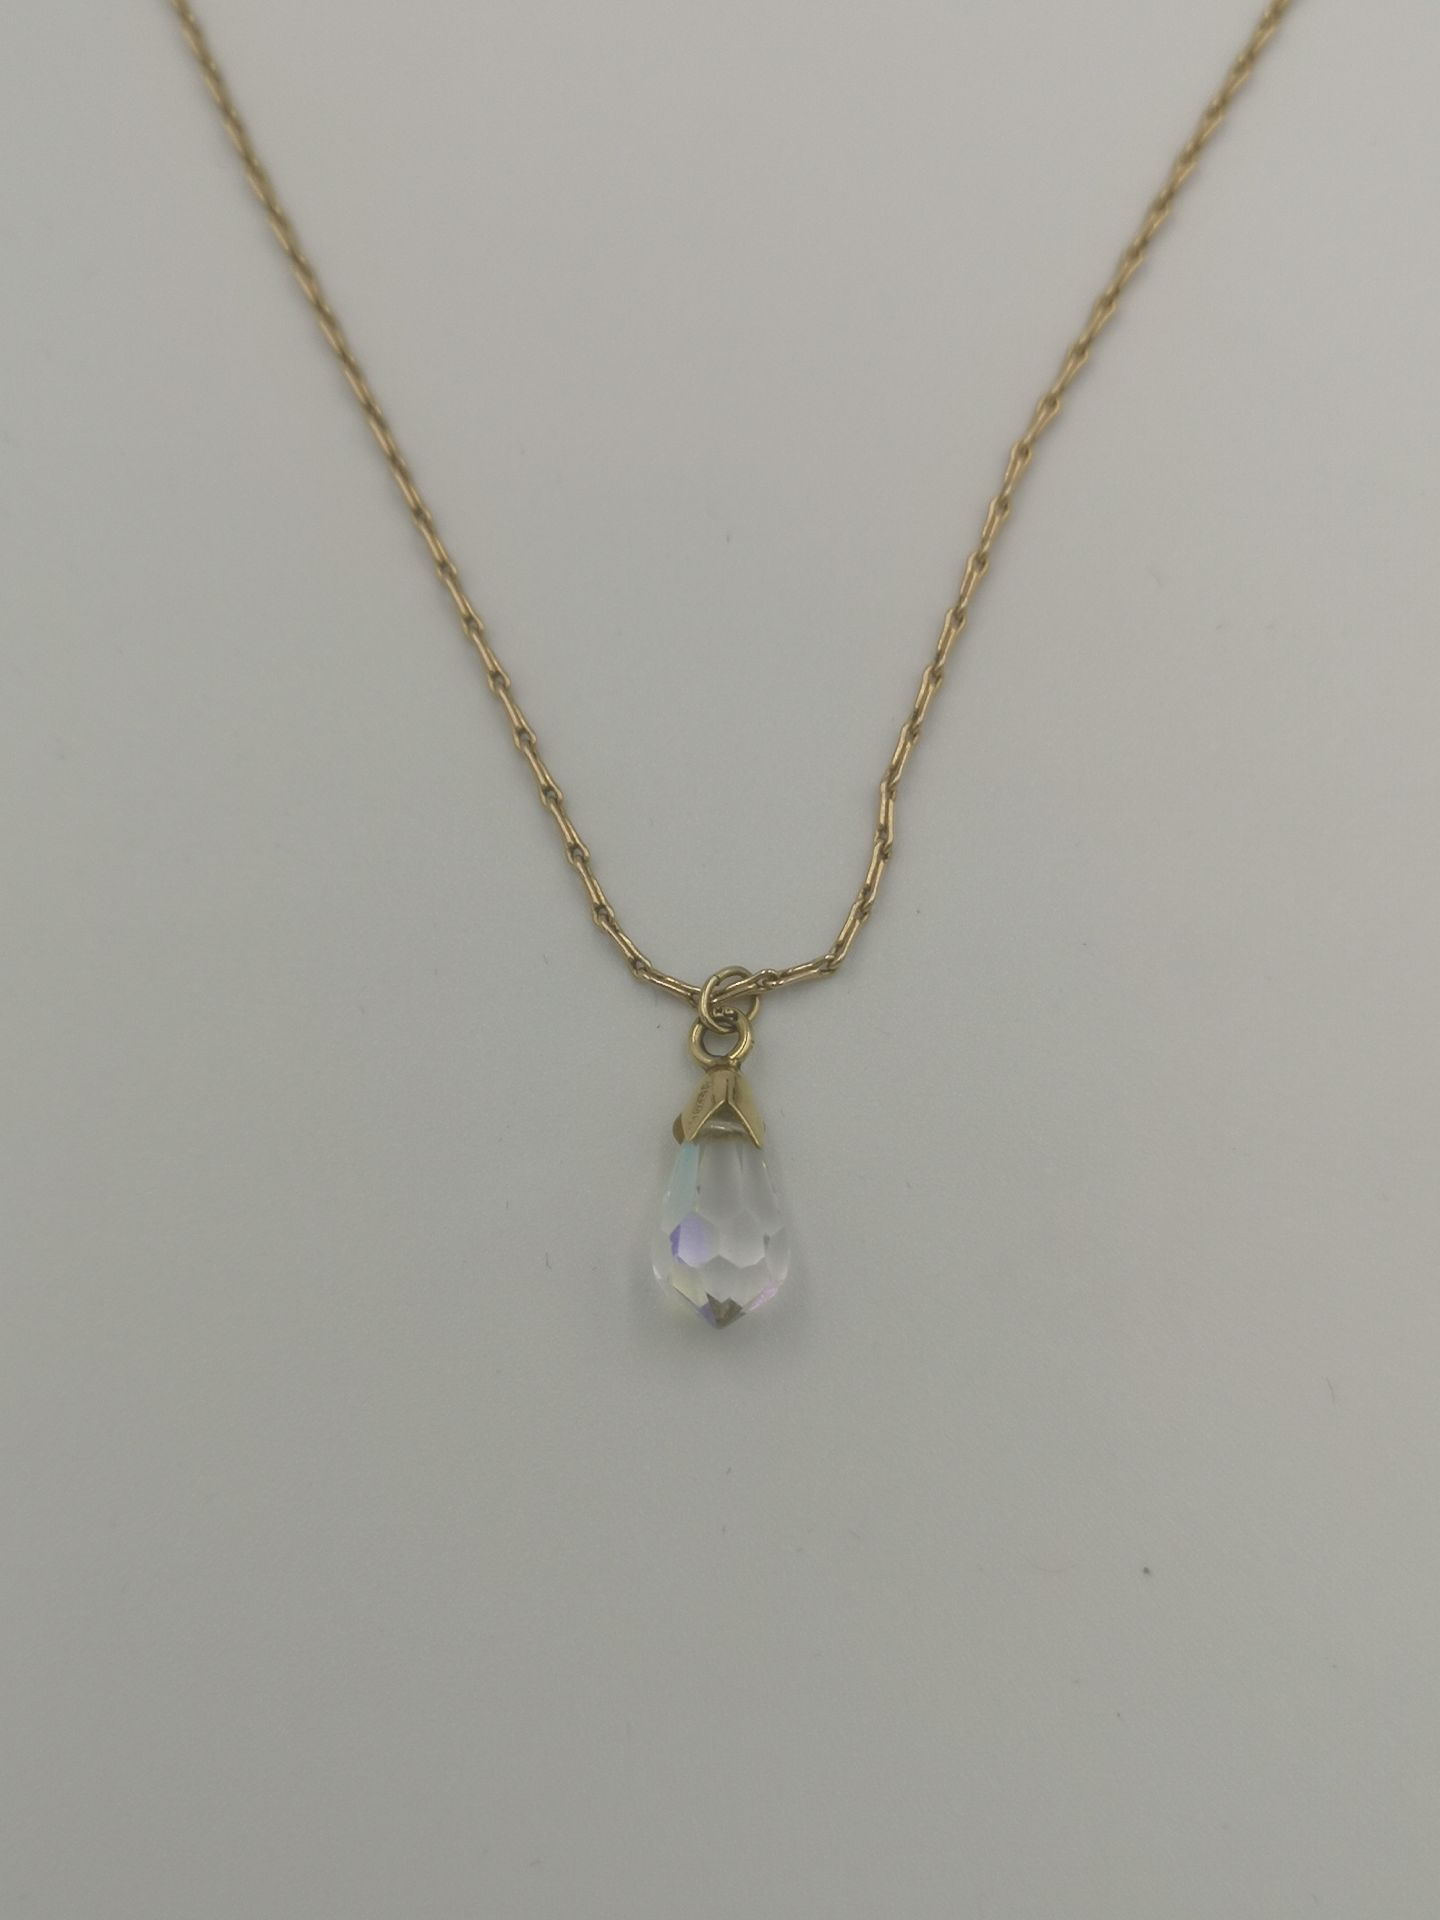 9ct gold chain with 9ct gold set glass pendant